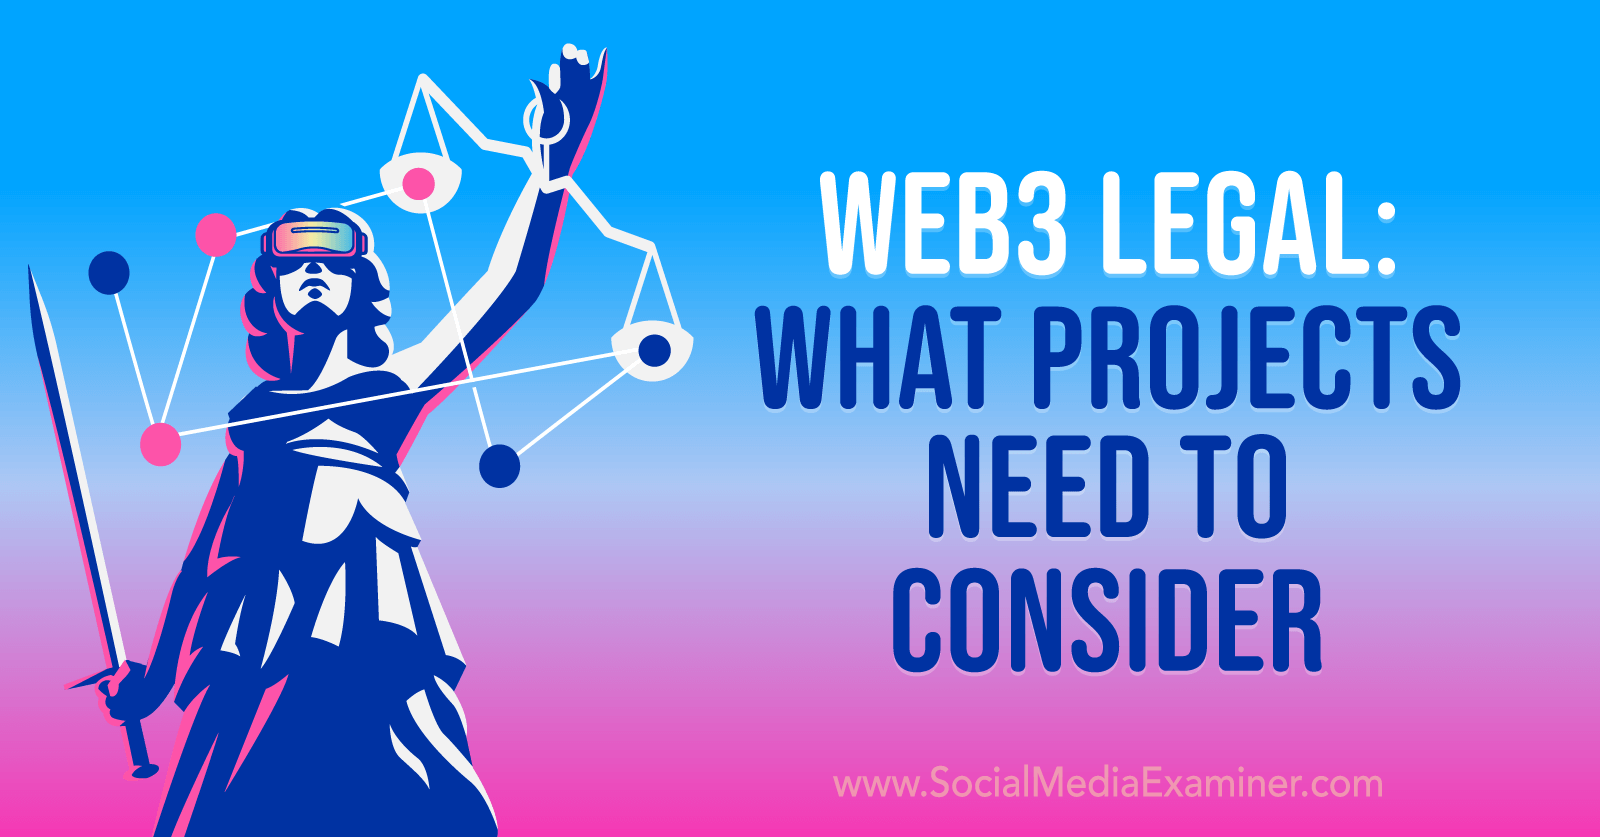 Web3 Legal: What Projects Need to Consider-Social Media Examiner